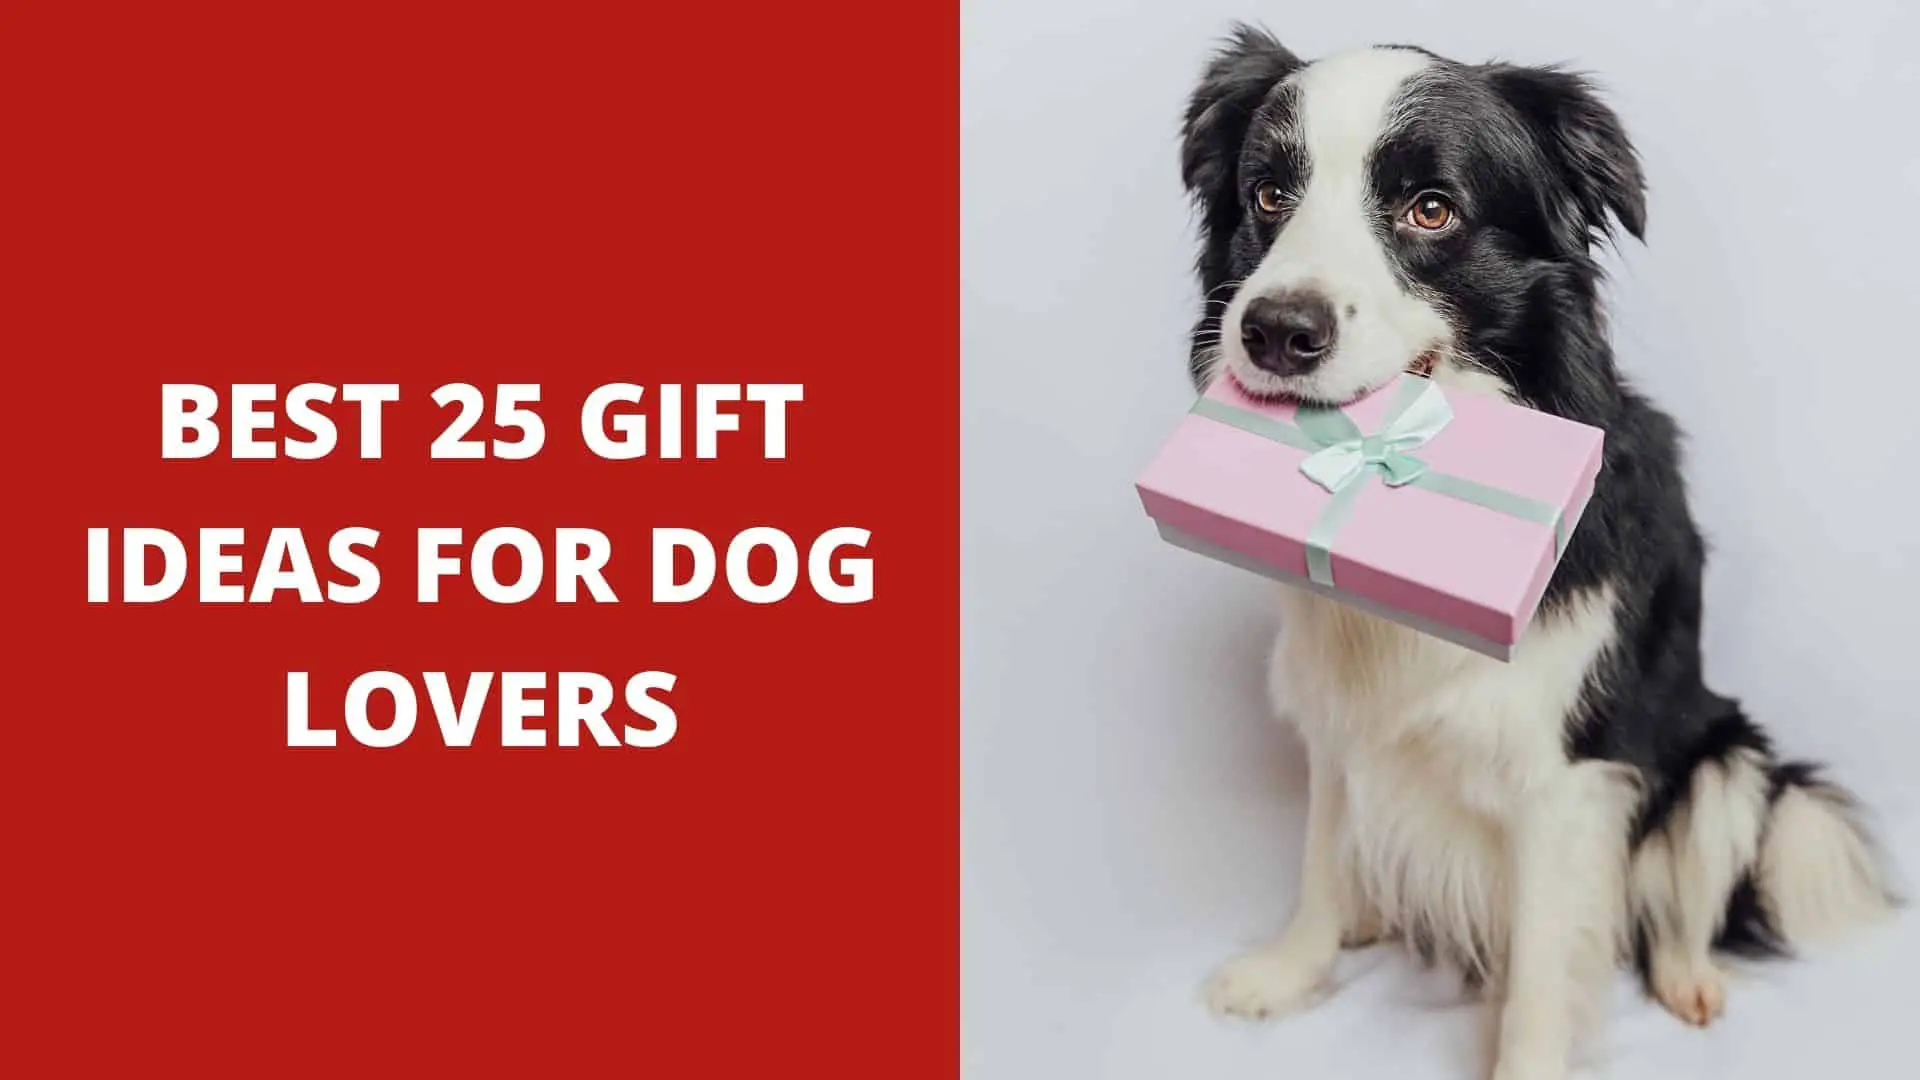 Best 25 Gift Ideas for Dog Lovers